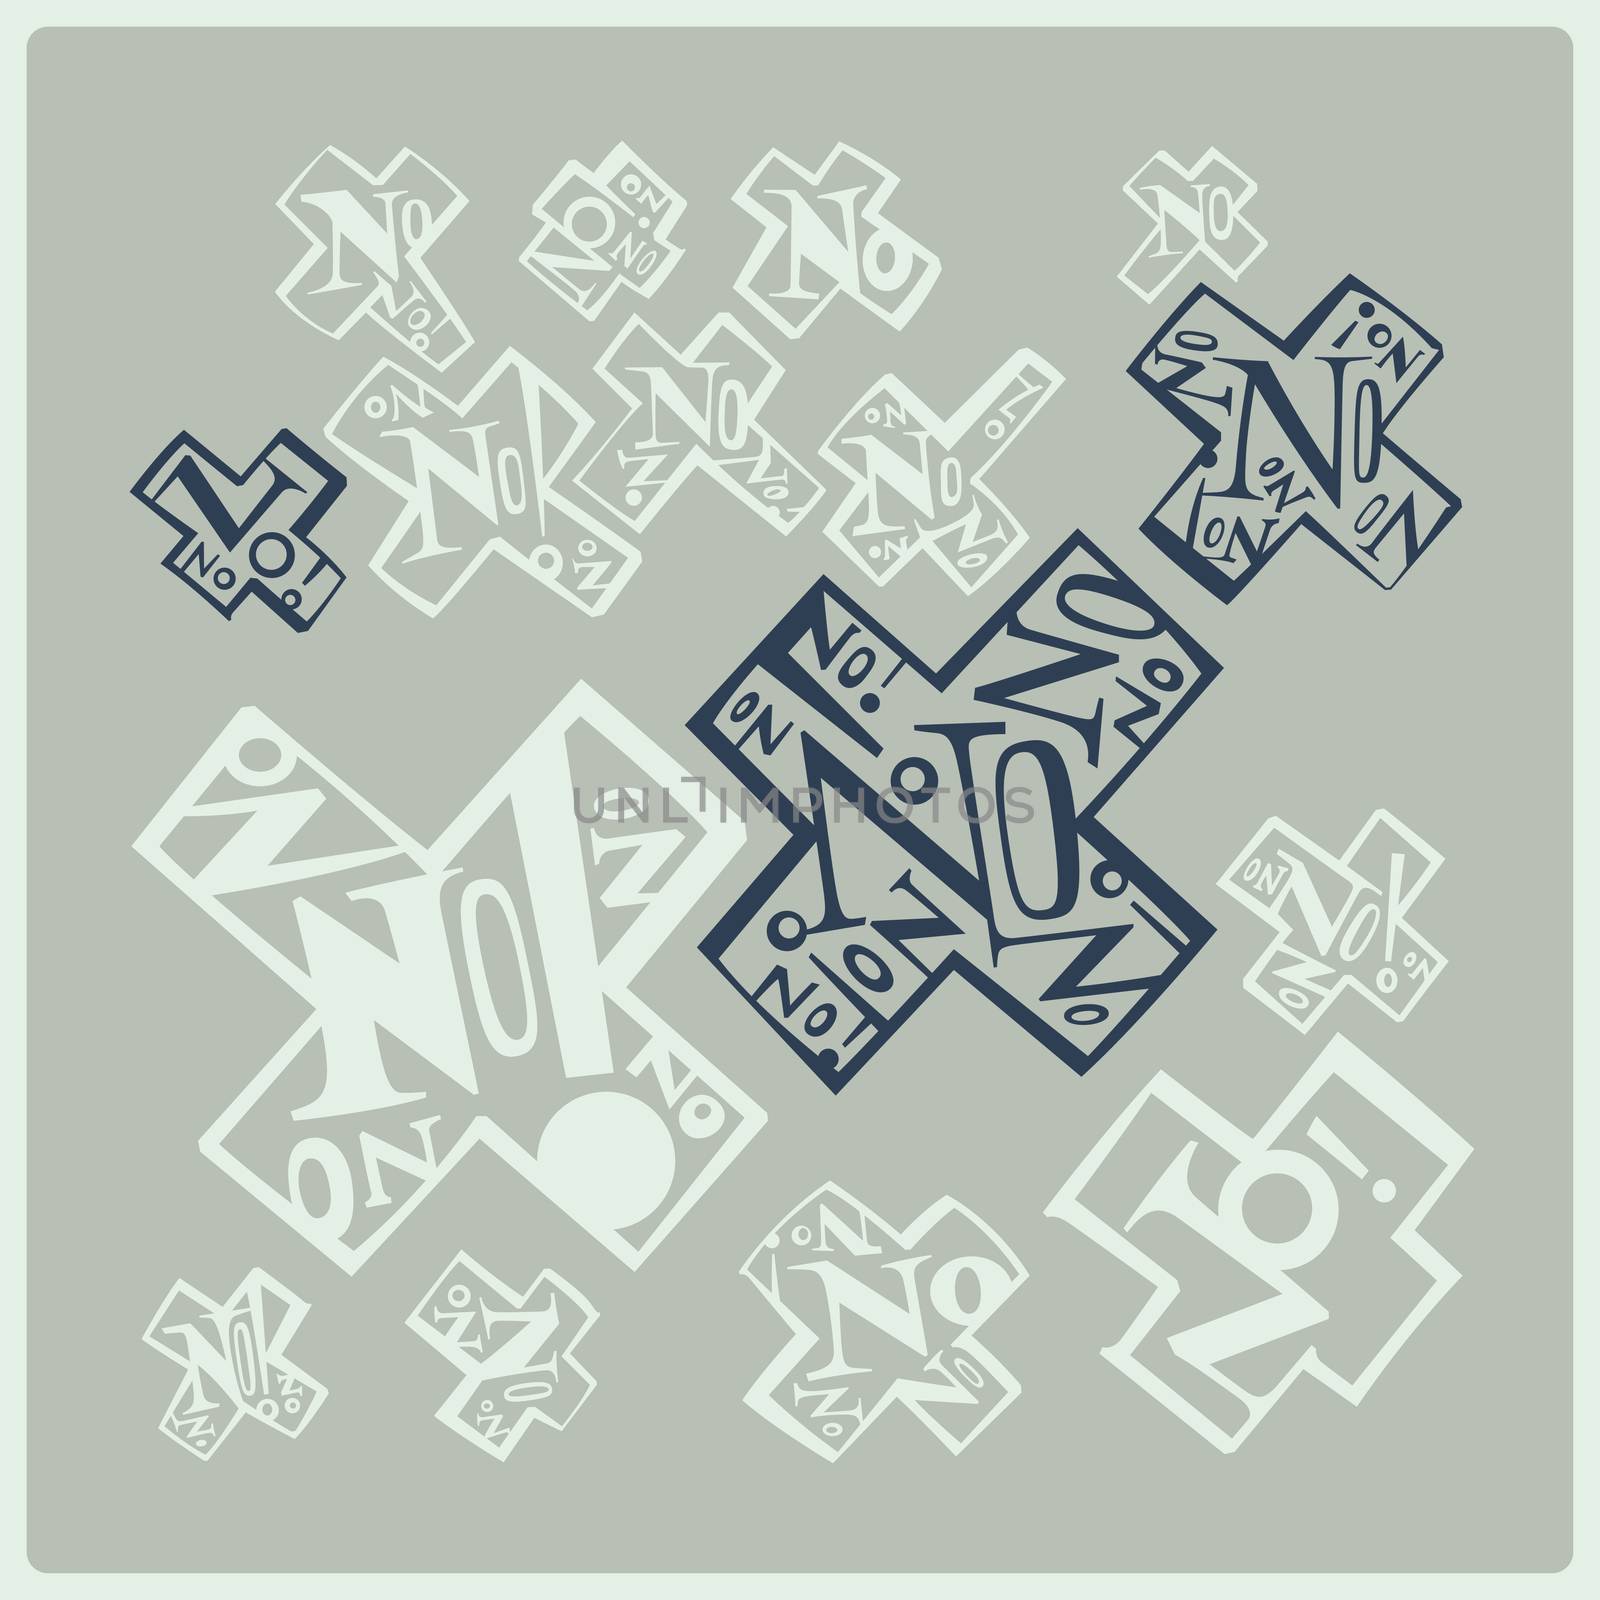 Calligraphy of the word "No" inside of cross as a mark of rejection denial illustration vector